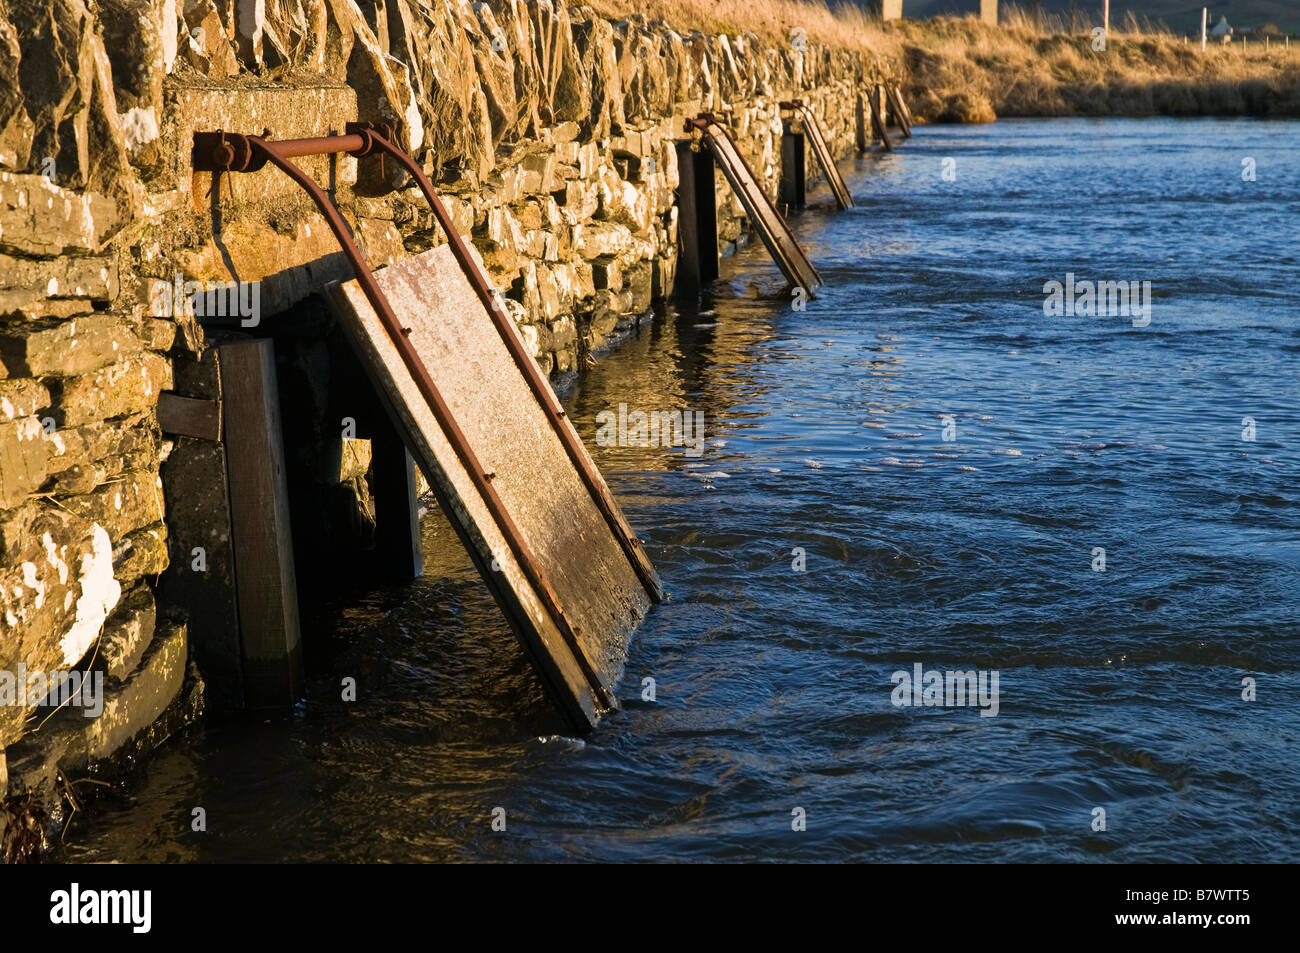 dh  STENNESS ORKNEY Sluice gates between Loch of Harray and Loch of Stenness ebbing tide sluicegates floodgates tidal ebb flood prevention measures Stock Photo